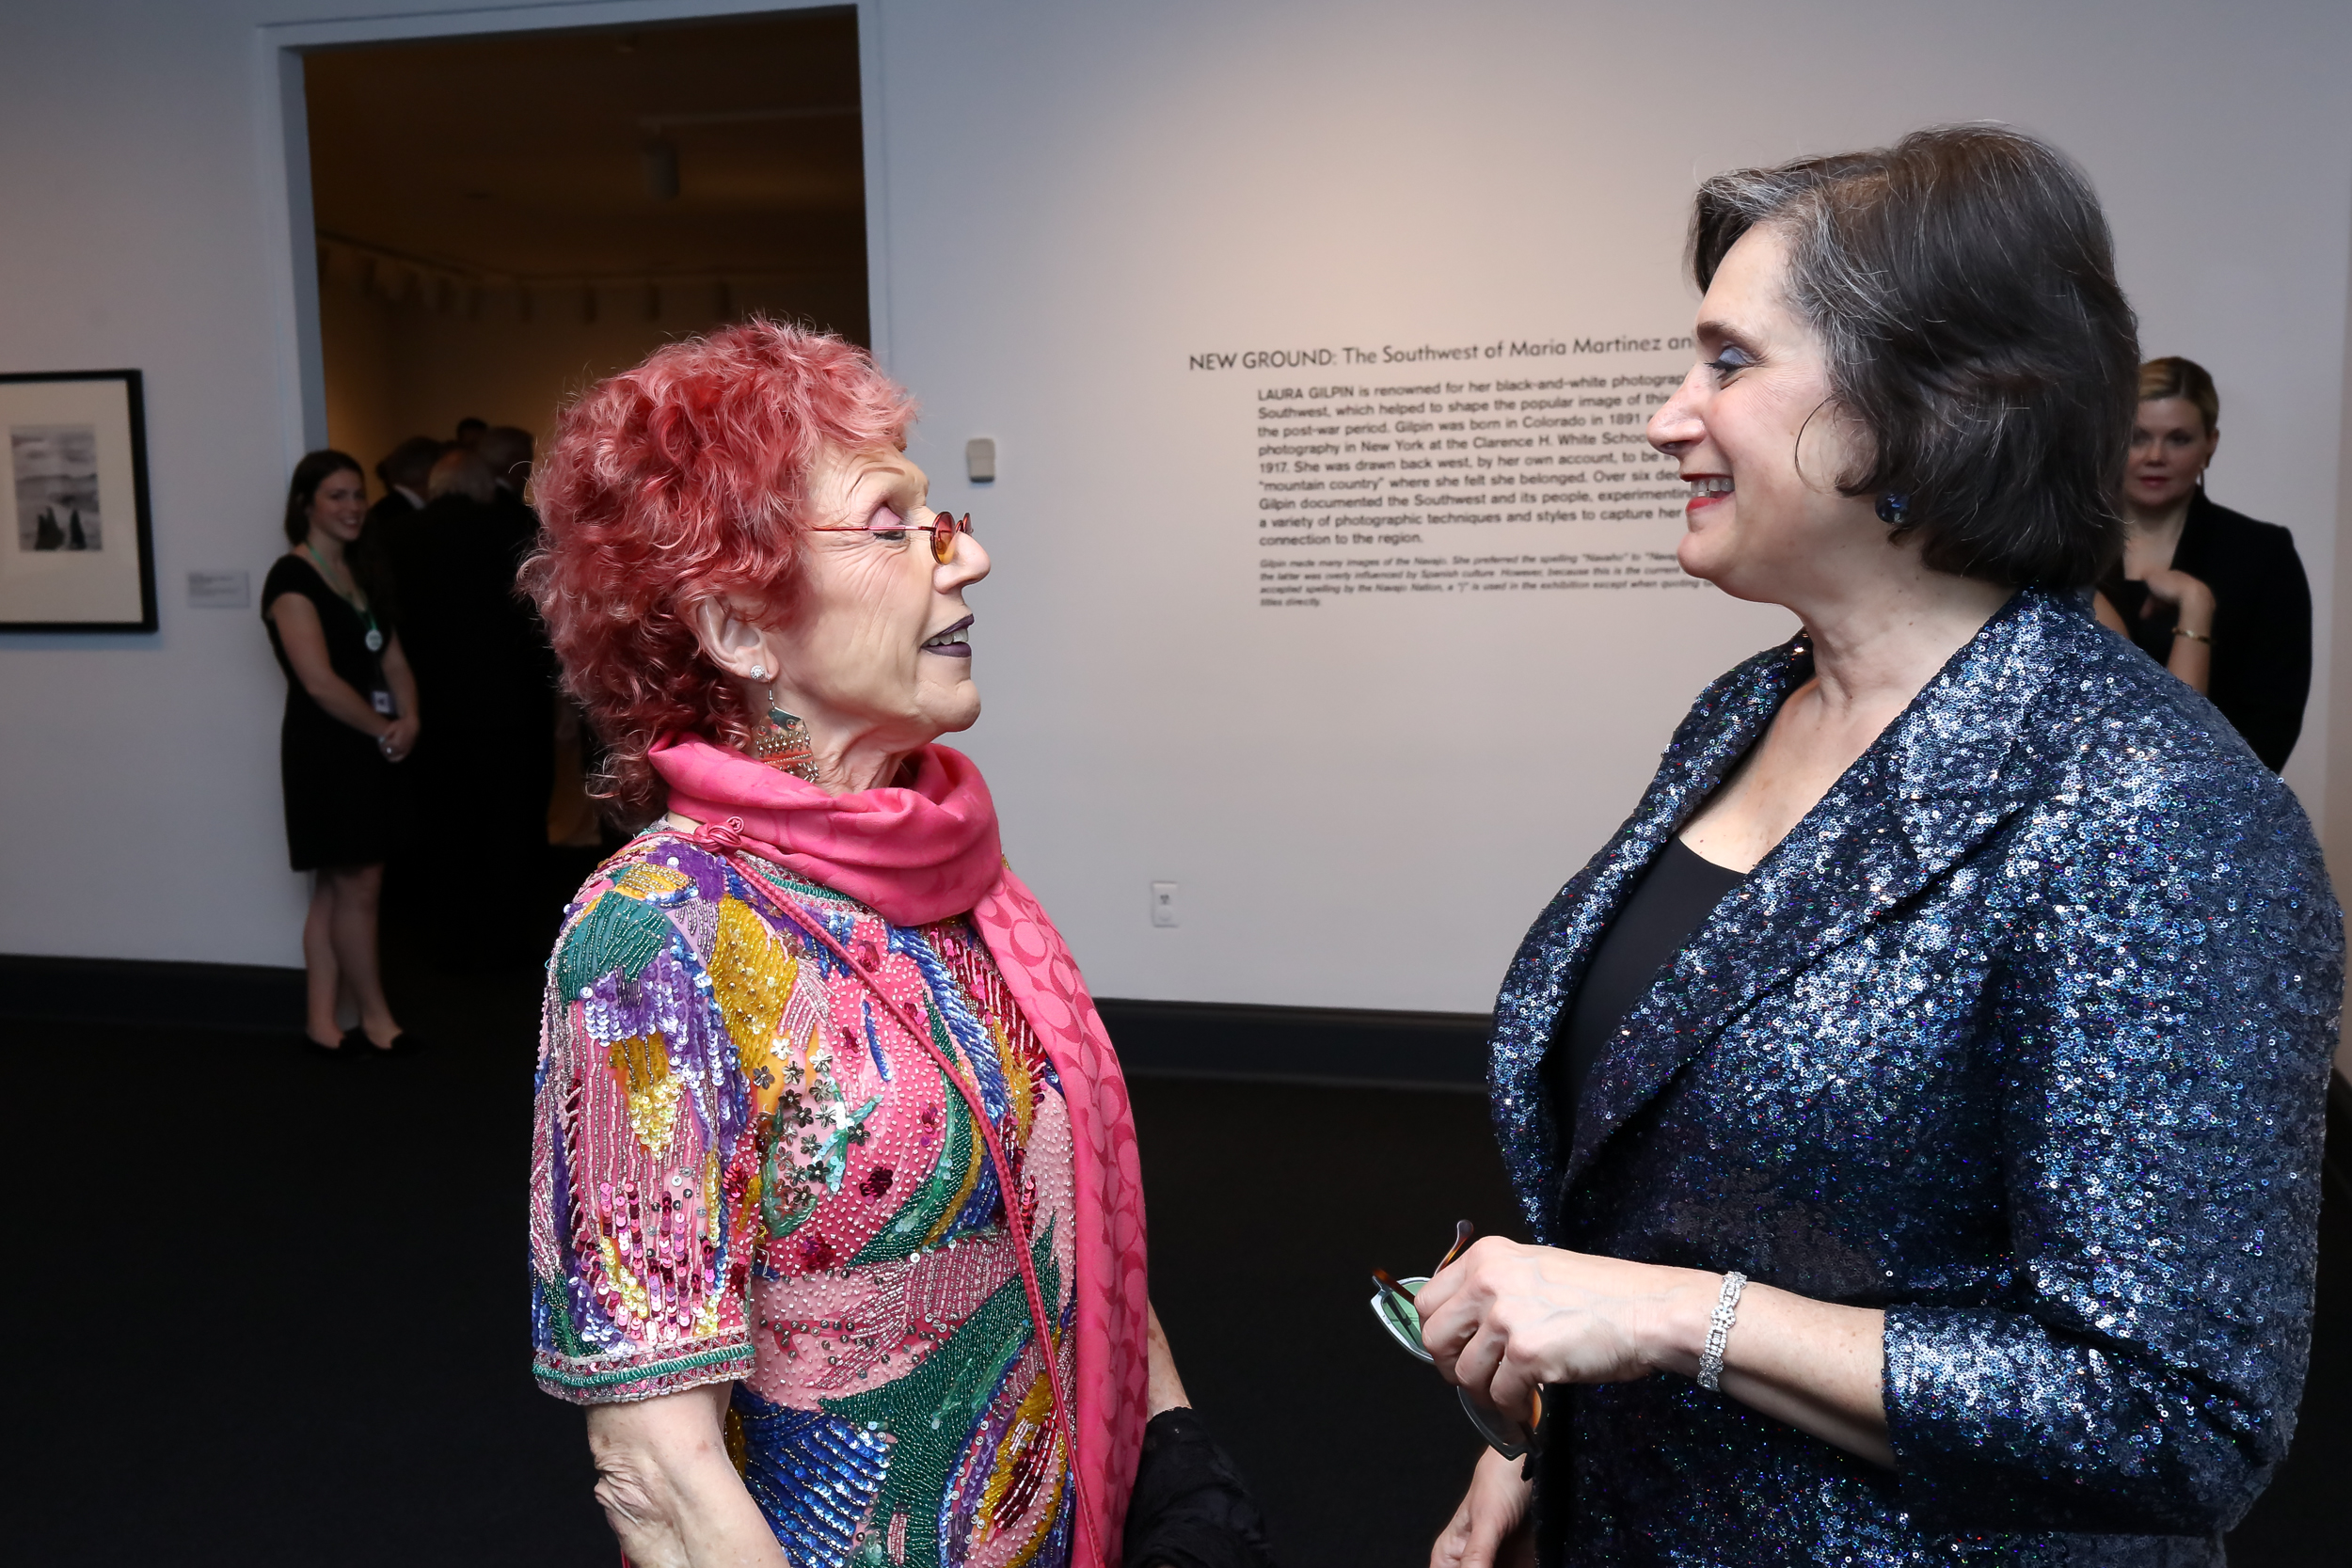 Woman with bright red hair and colorful dress talking to another woman in blue sparkly blazer in a museum.